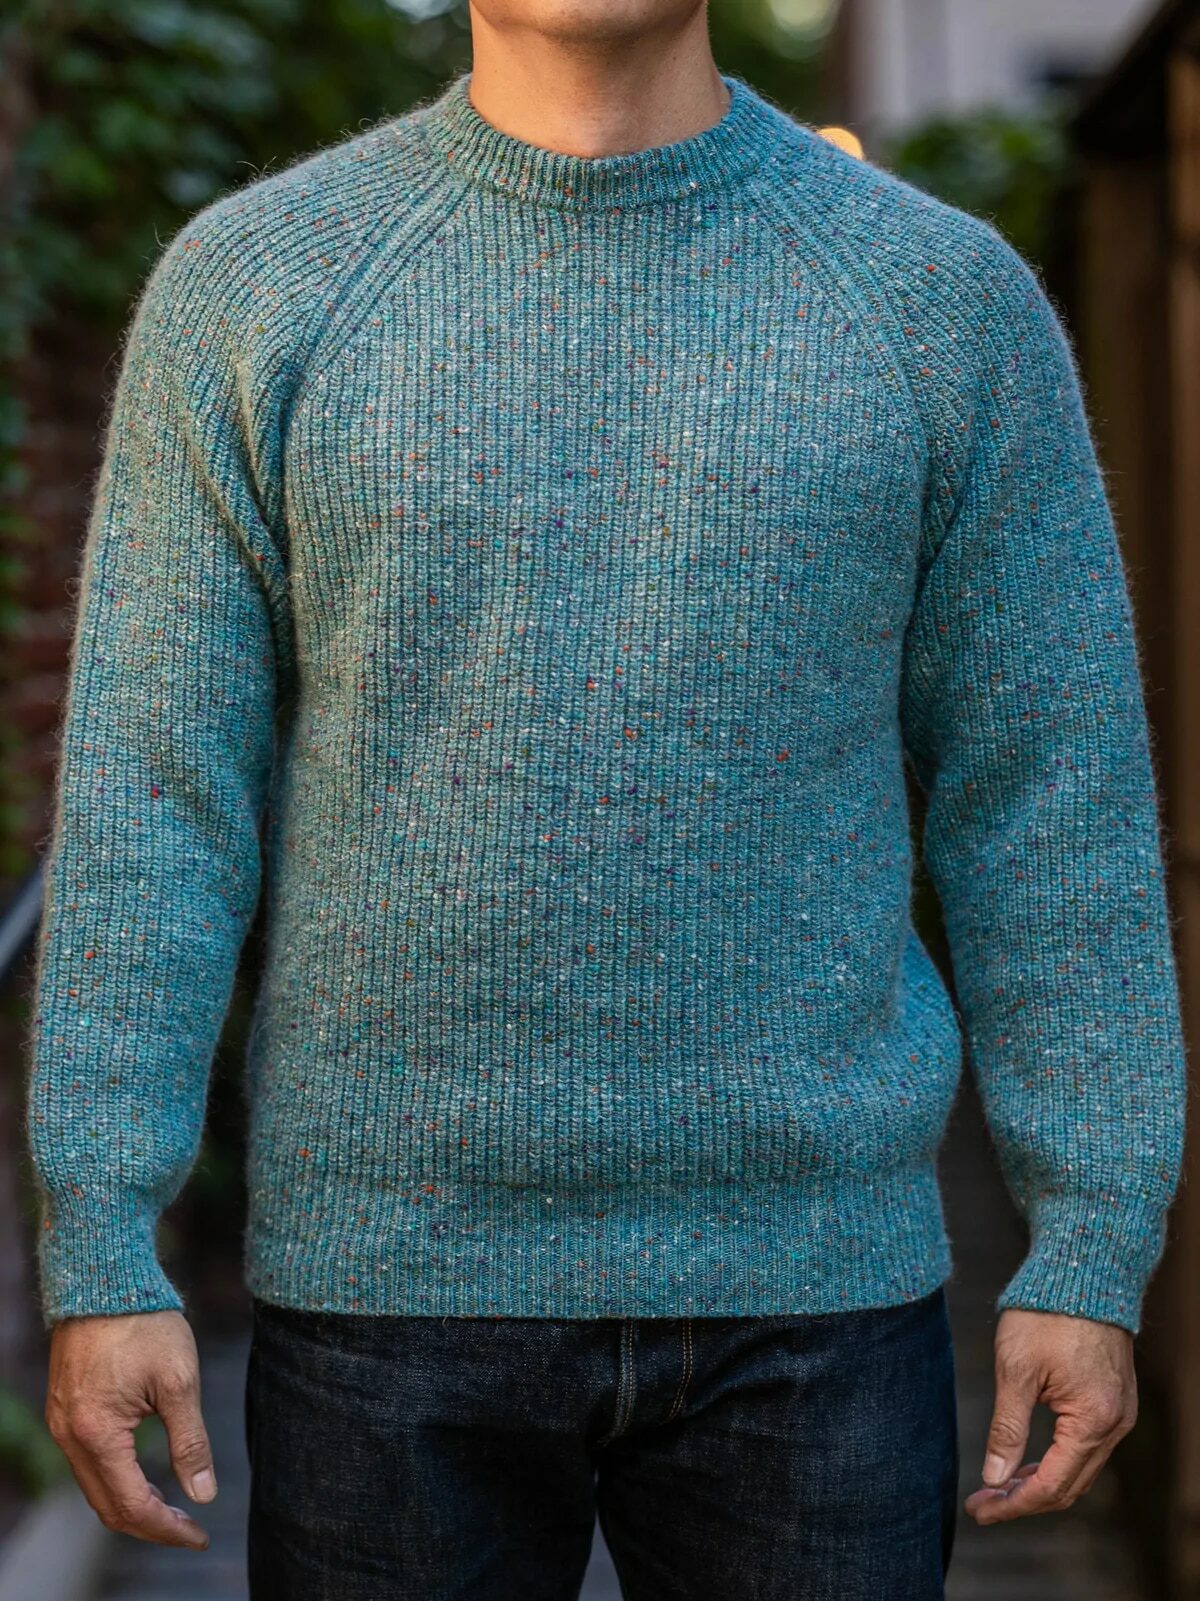 https://denimhunters.com/wp-content/uploads/Rebel-Essentials-Fishermans-Sweater-Guide-Left-Field-Tweed-Sweater-Blue-Fit-Pic-Franklin-and-Poe-edited.jpg